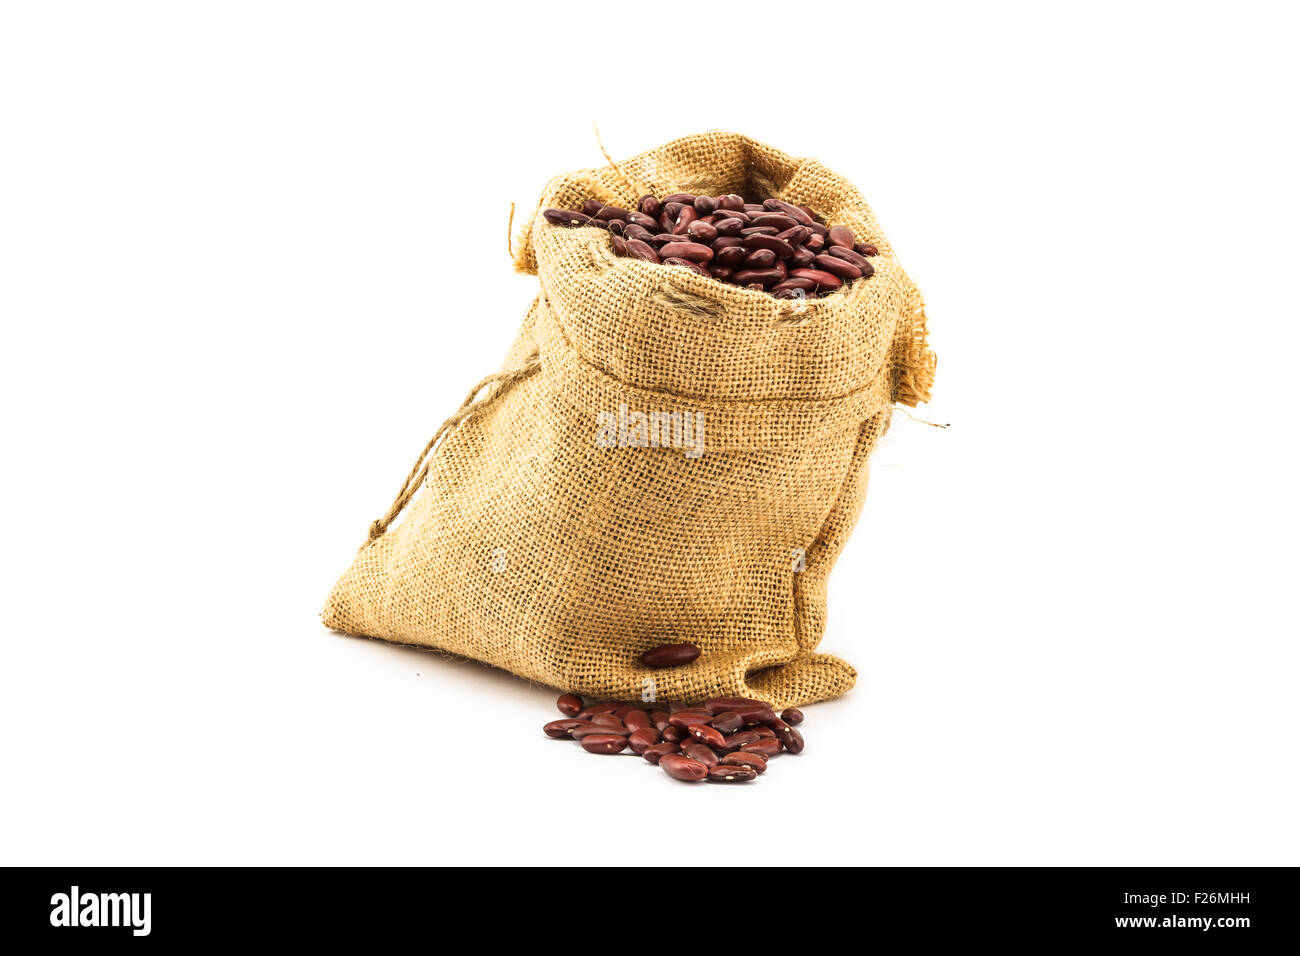 Uncooked red kidney bean on white background Stock Photo